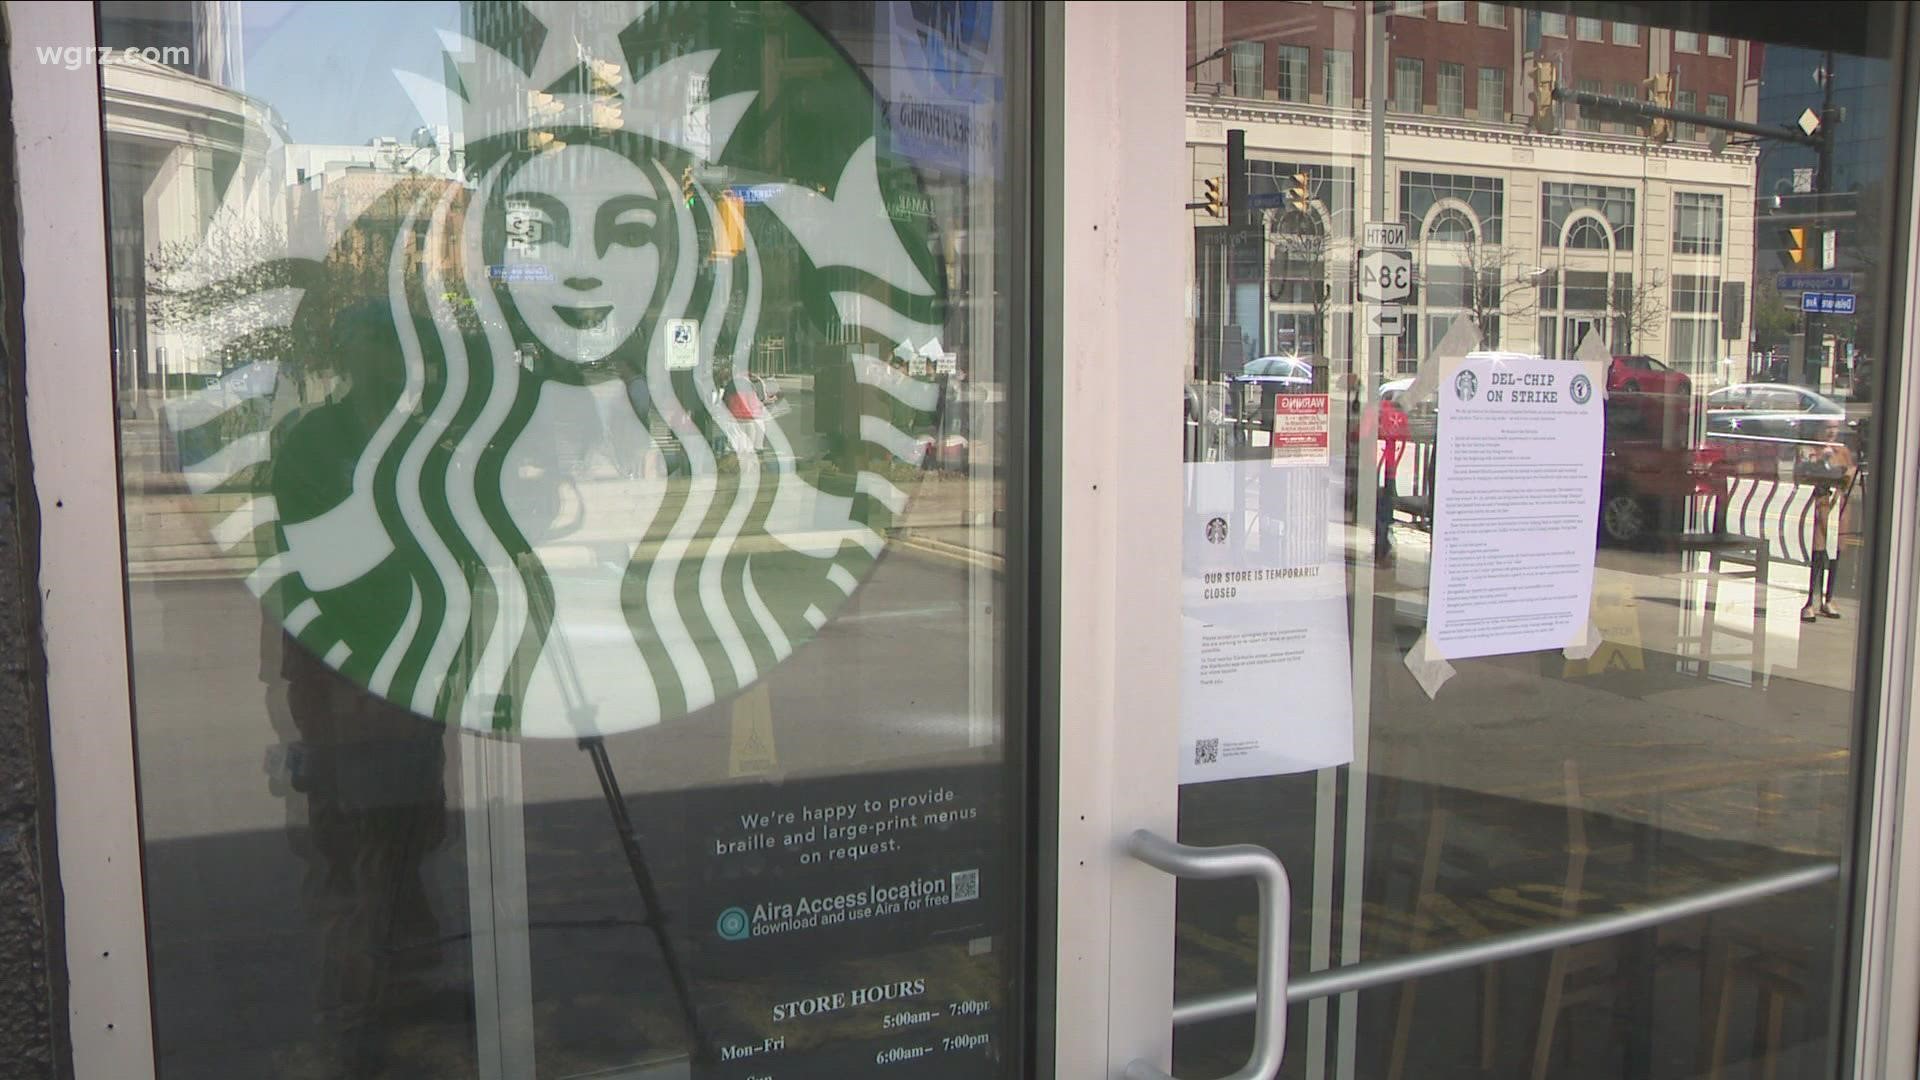 The National Labor Relations Board has issued an official complaint against Starbucks alleging they have committed hundreds of federal labor law violations.